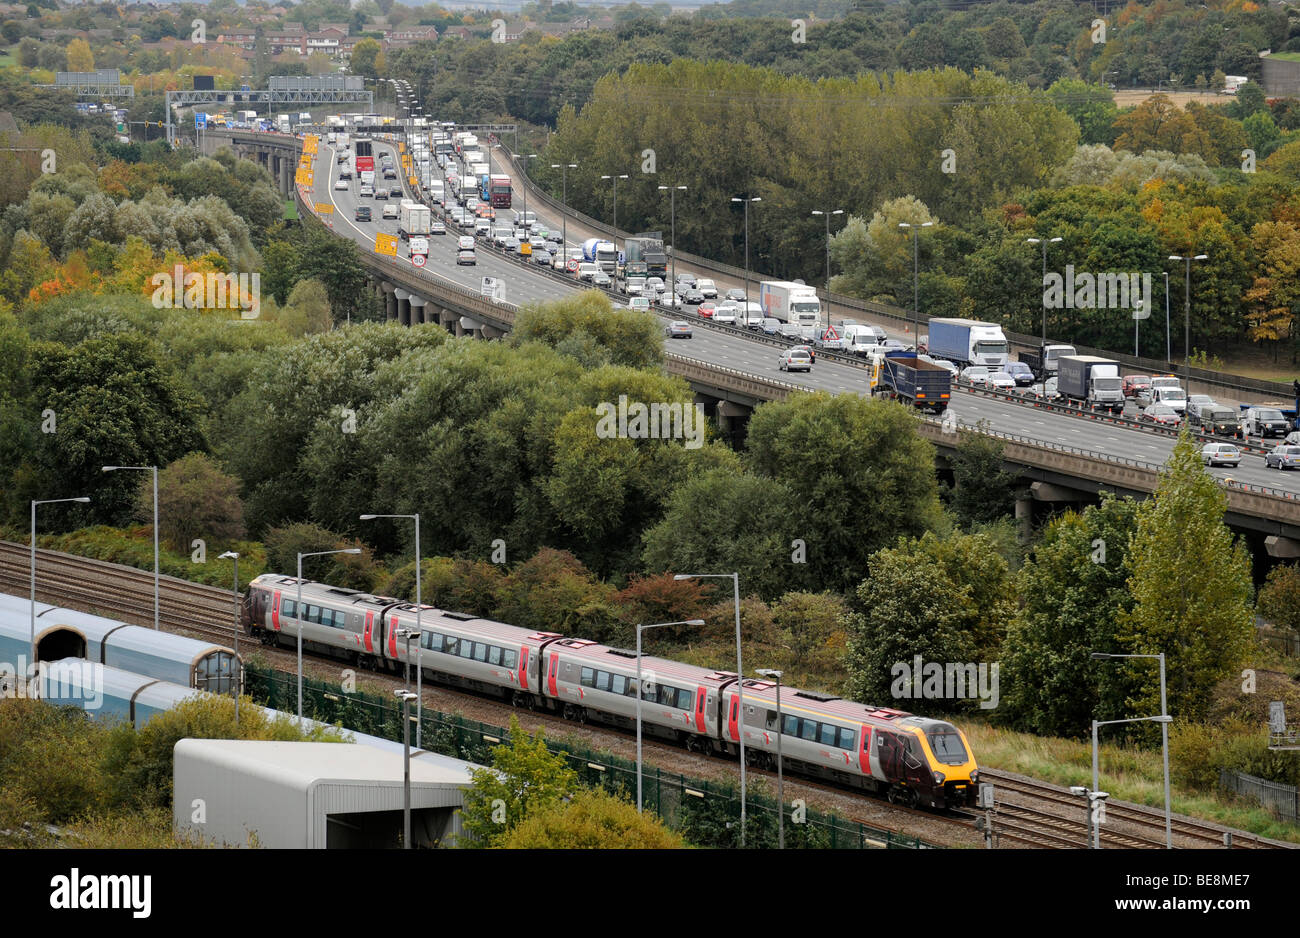 A  COMMUTER TRAIN RUNNING NEXT TO QUEUING TRAFFIC ON THE ELEVATED M6 MOTORWAY NORTHBOUND NEAR BIRMINGHAM ,UK Stock Photo